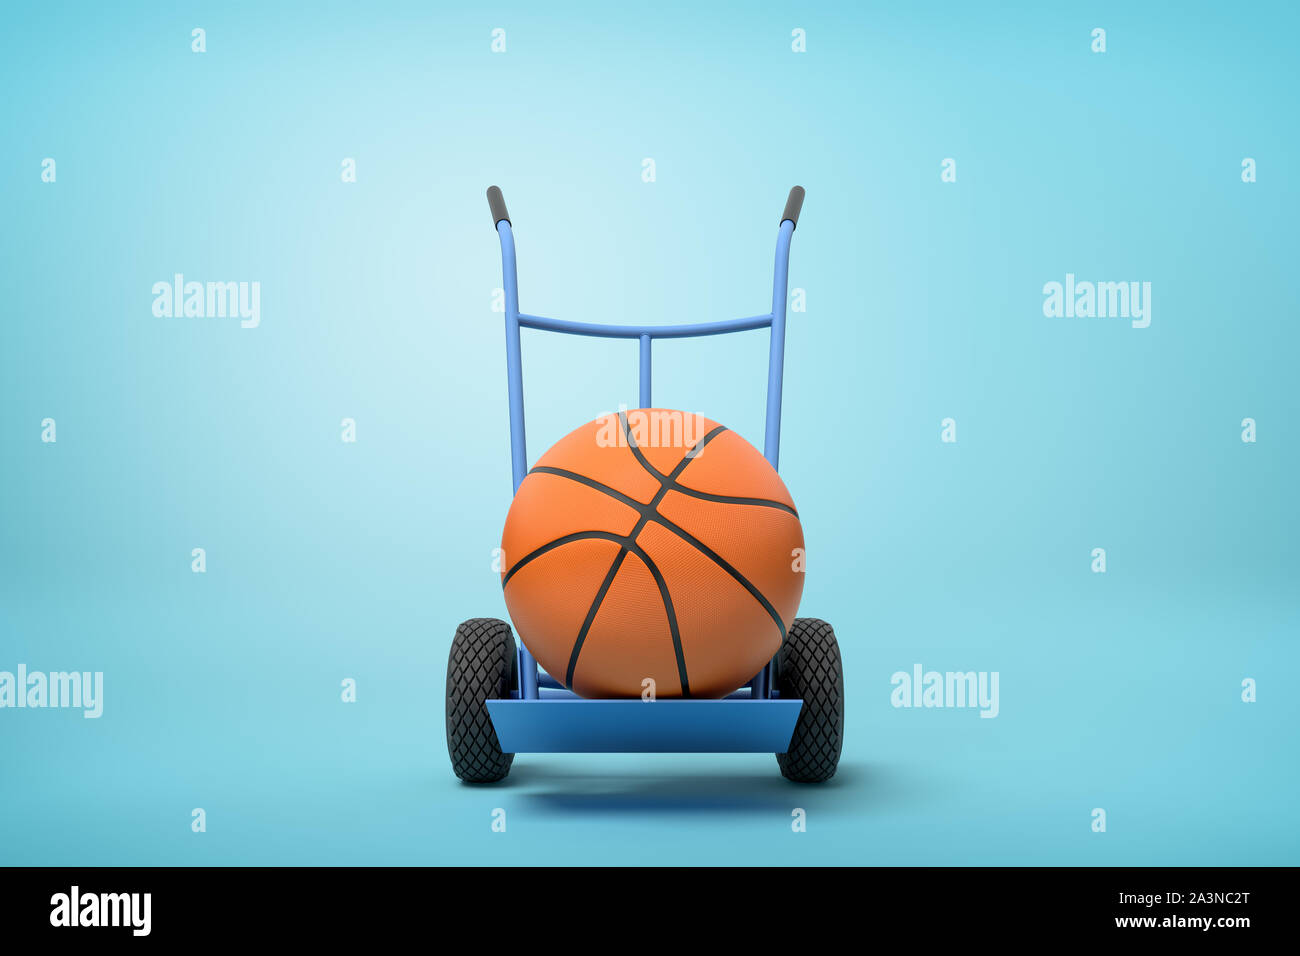 3d rendering of orange basketball ball on a hand truck on blue background Stock Photo